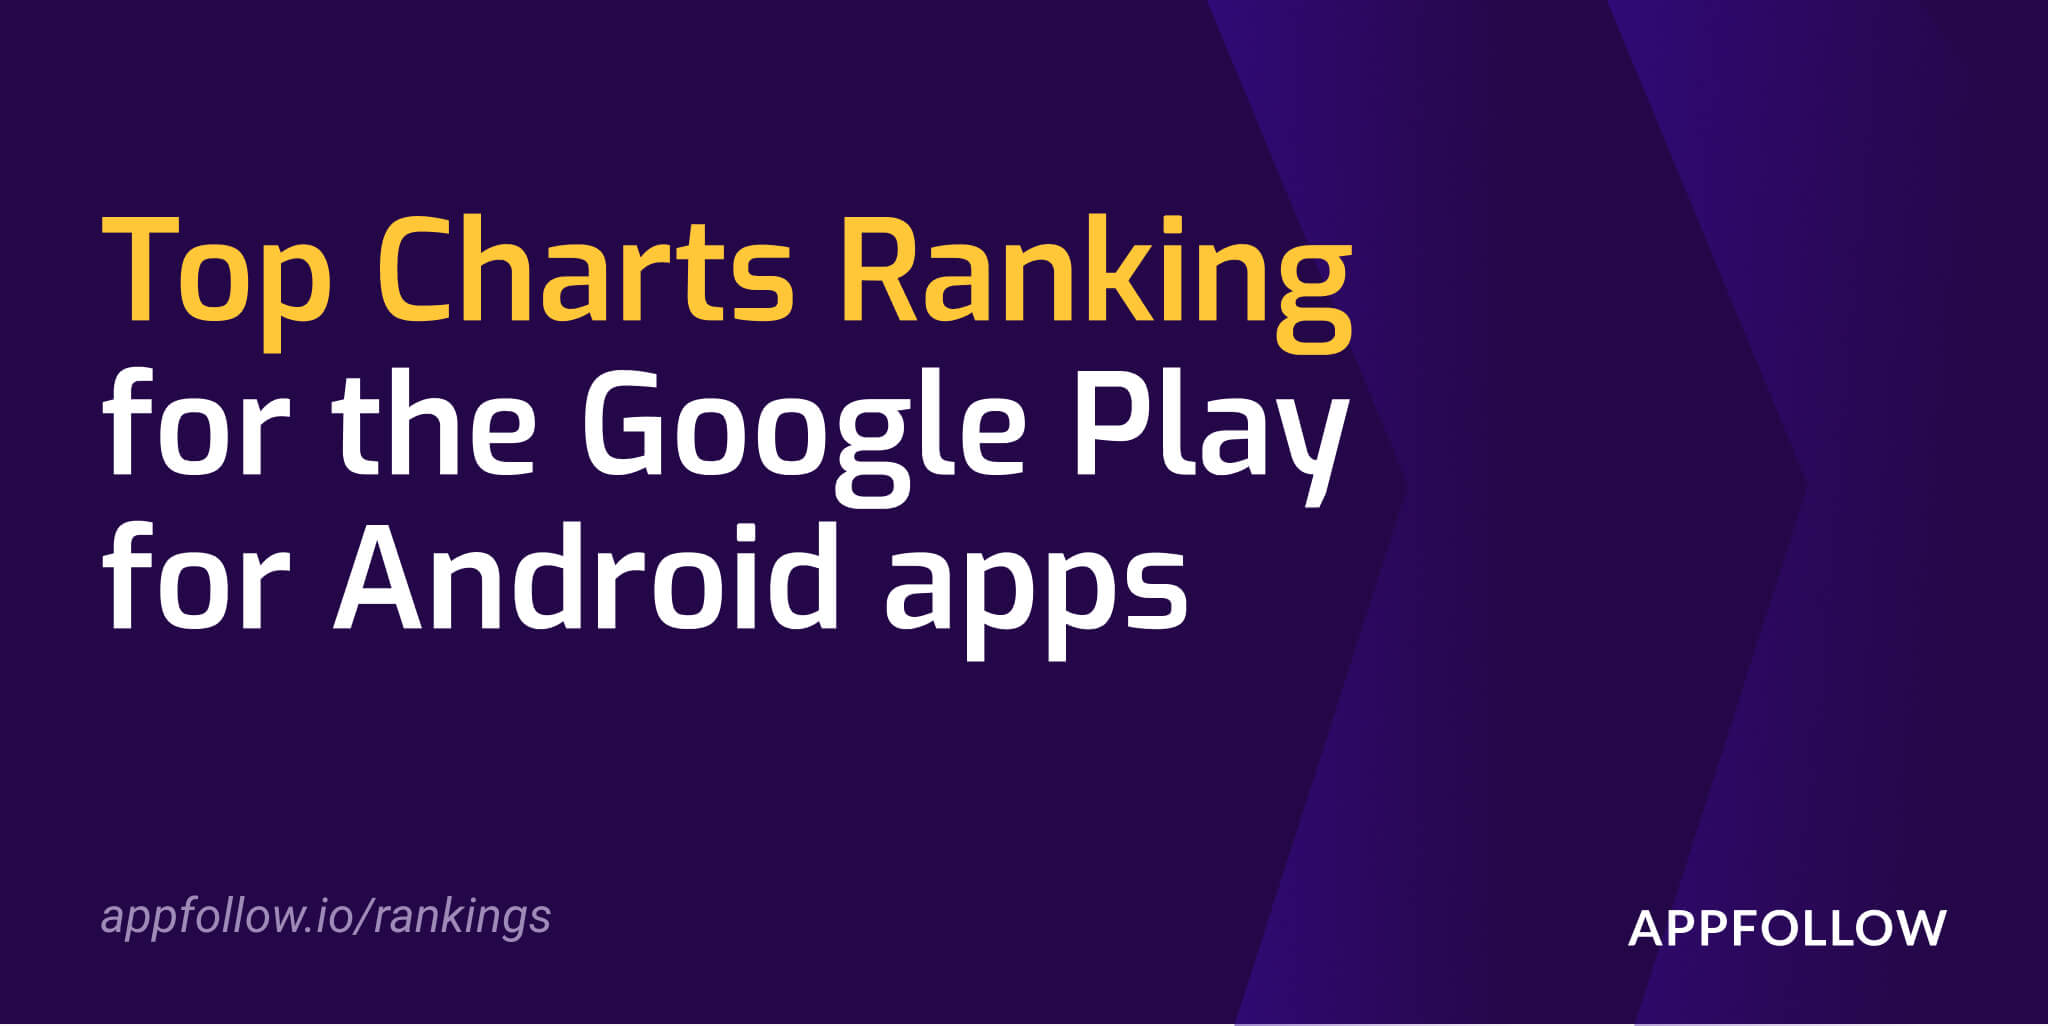 Google Play Top Charts Ranking For Android Apps Appfollow De - 60 free info how to fix roblox lag pdf doc 2019